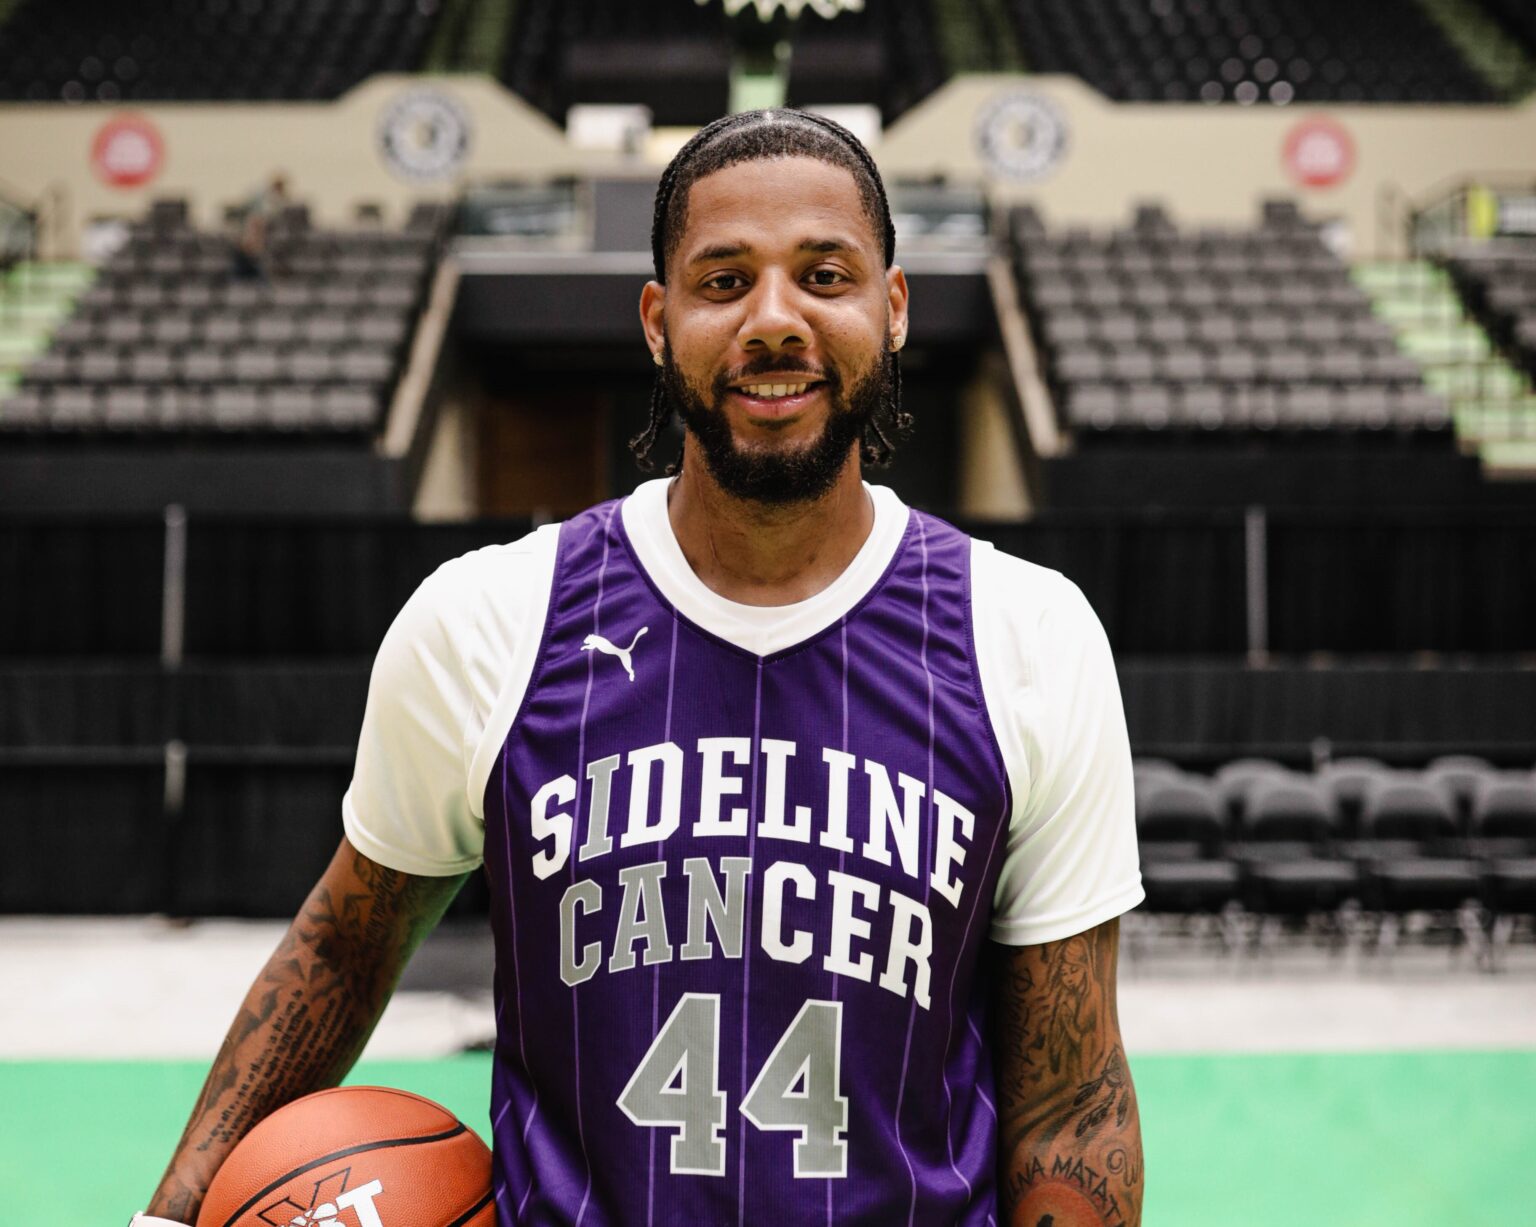 Former basketball pro Will Wise's stage four cancer diagnosis came as a shock after experiencing excessive sweating post-workout. Battling thyroid and adrenal gland cancer, his positive outlook inspires as he documents his journey and initiates the 'CancerBae' movement.